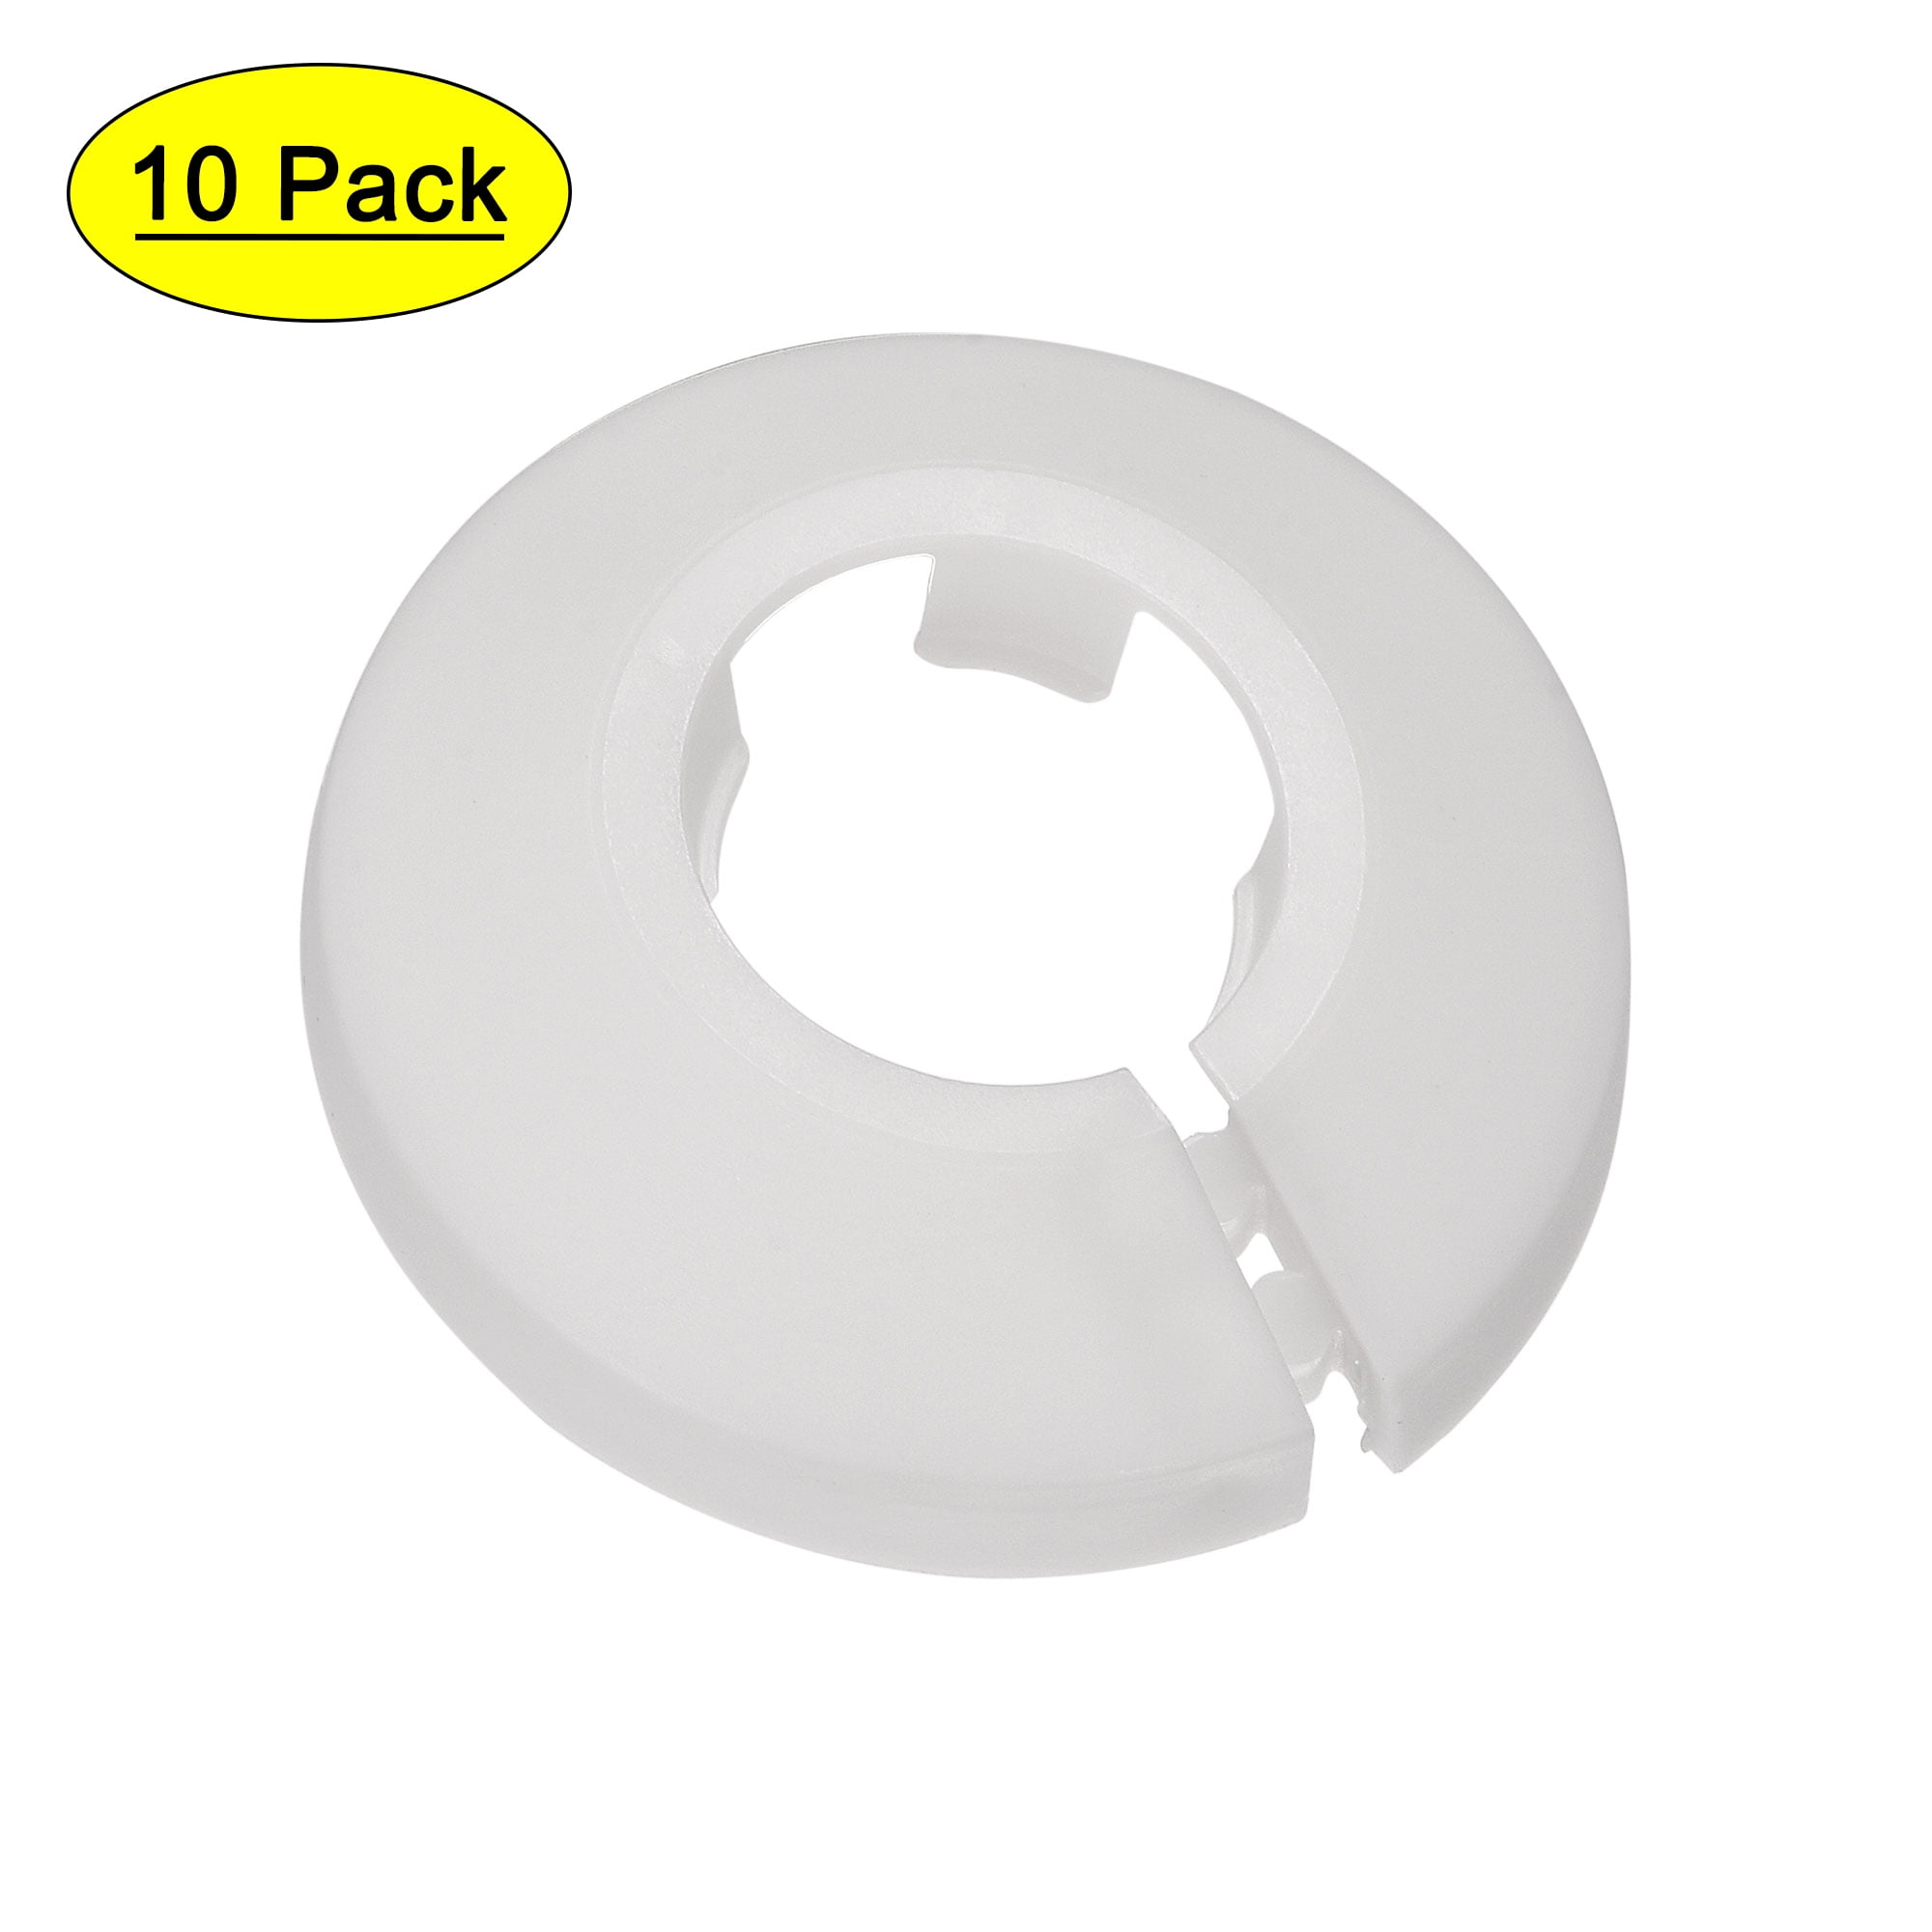 uxcell Pipe Collar 17mm PP Radiator Escutcheon Water Pipe Cover Decoration White 6 Pcs